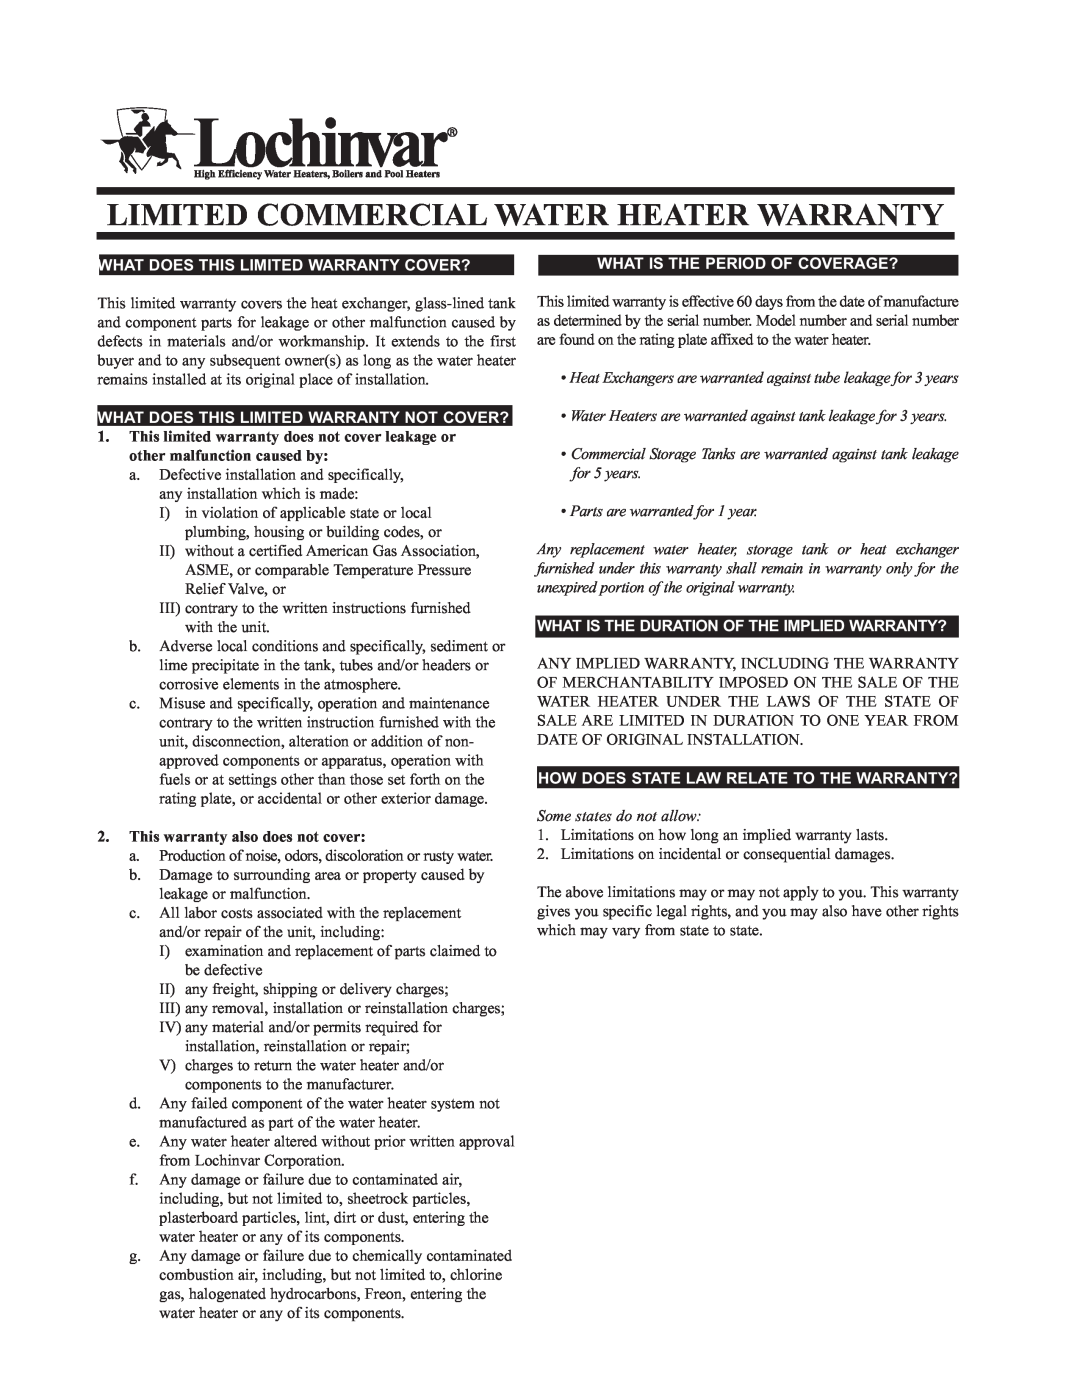 Lochinvar warranty Limited Commercial Water Heater Warranty, What Does This Limited Warranty Cover? 